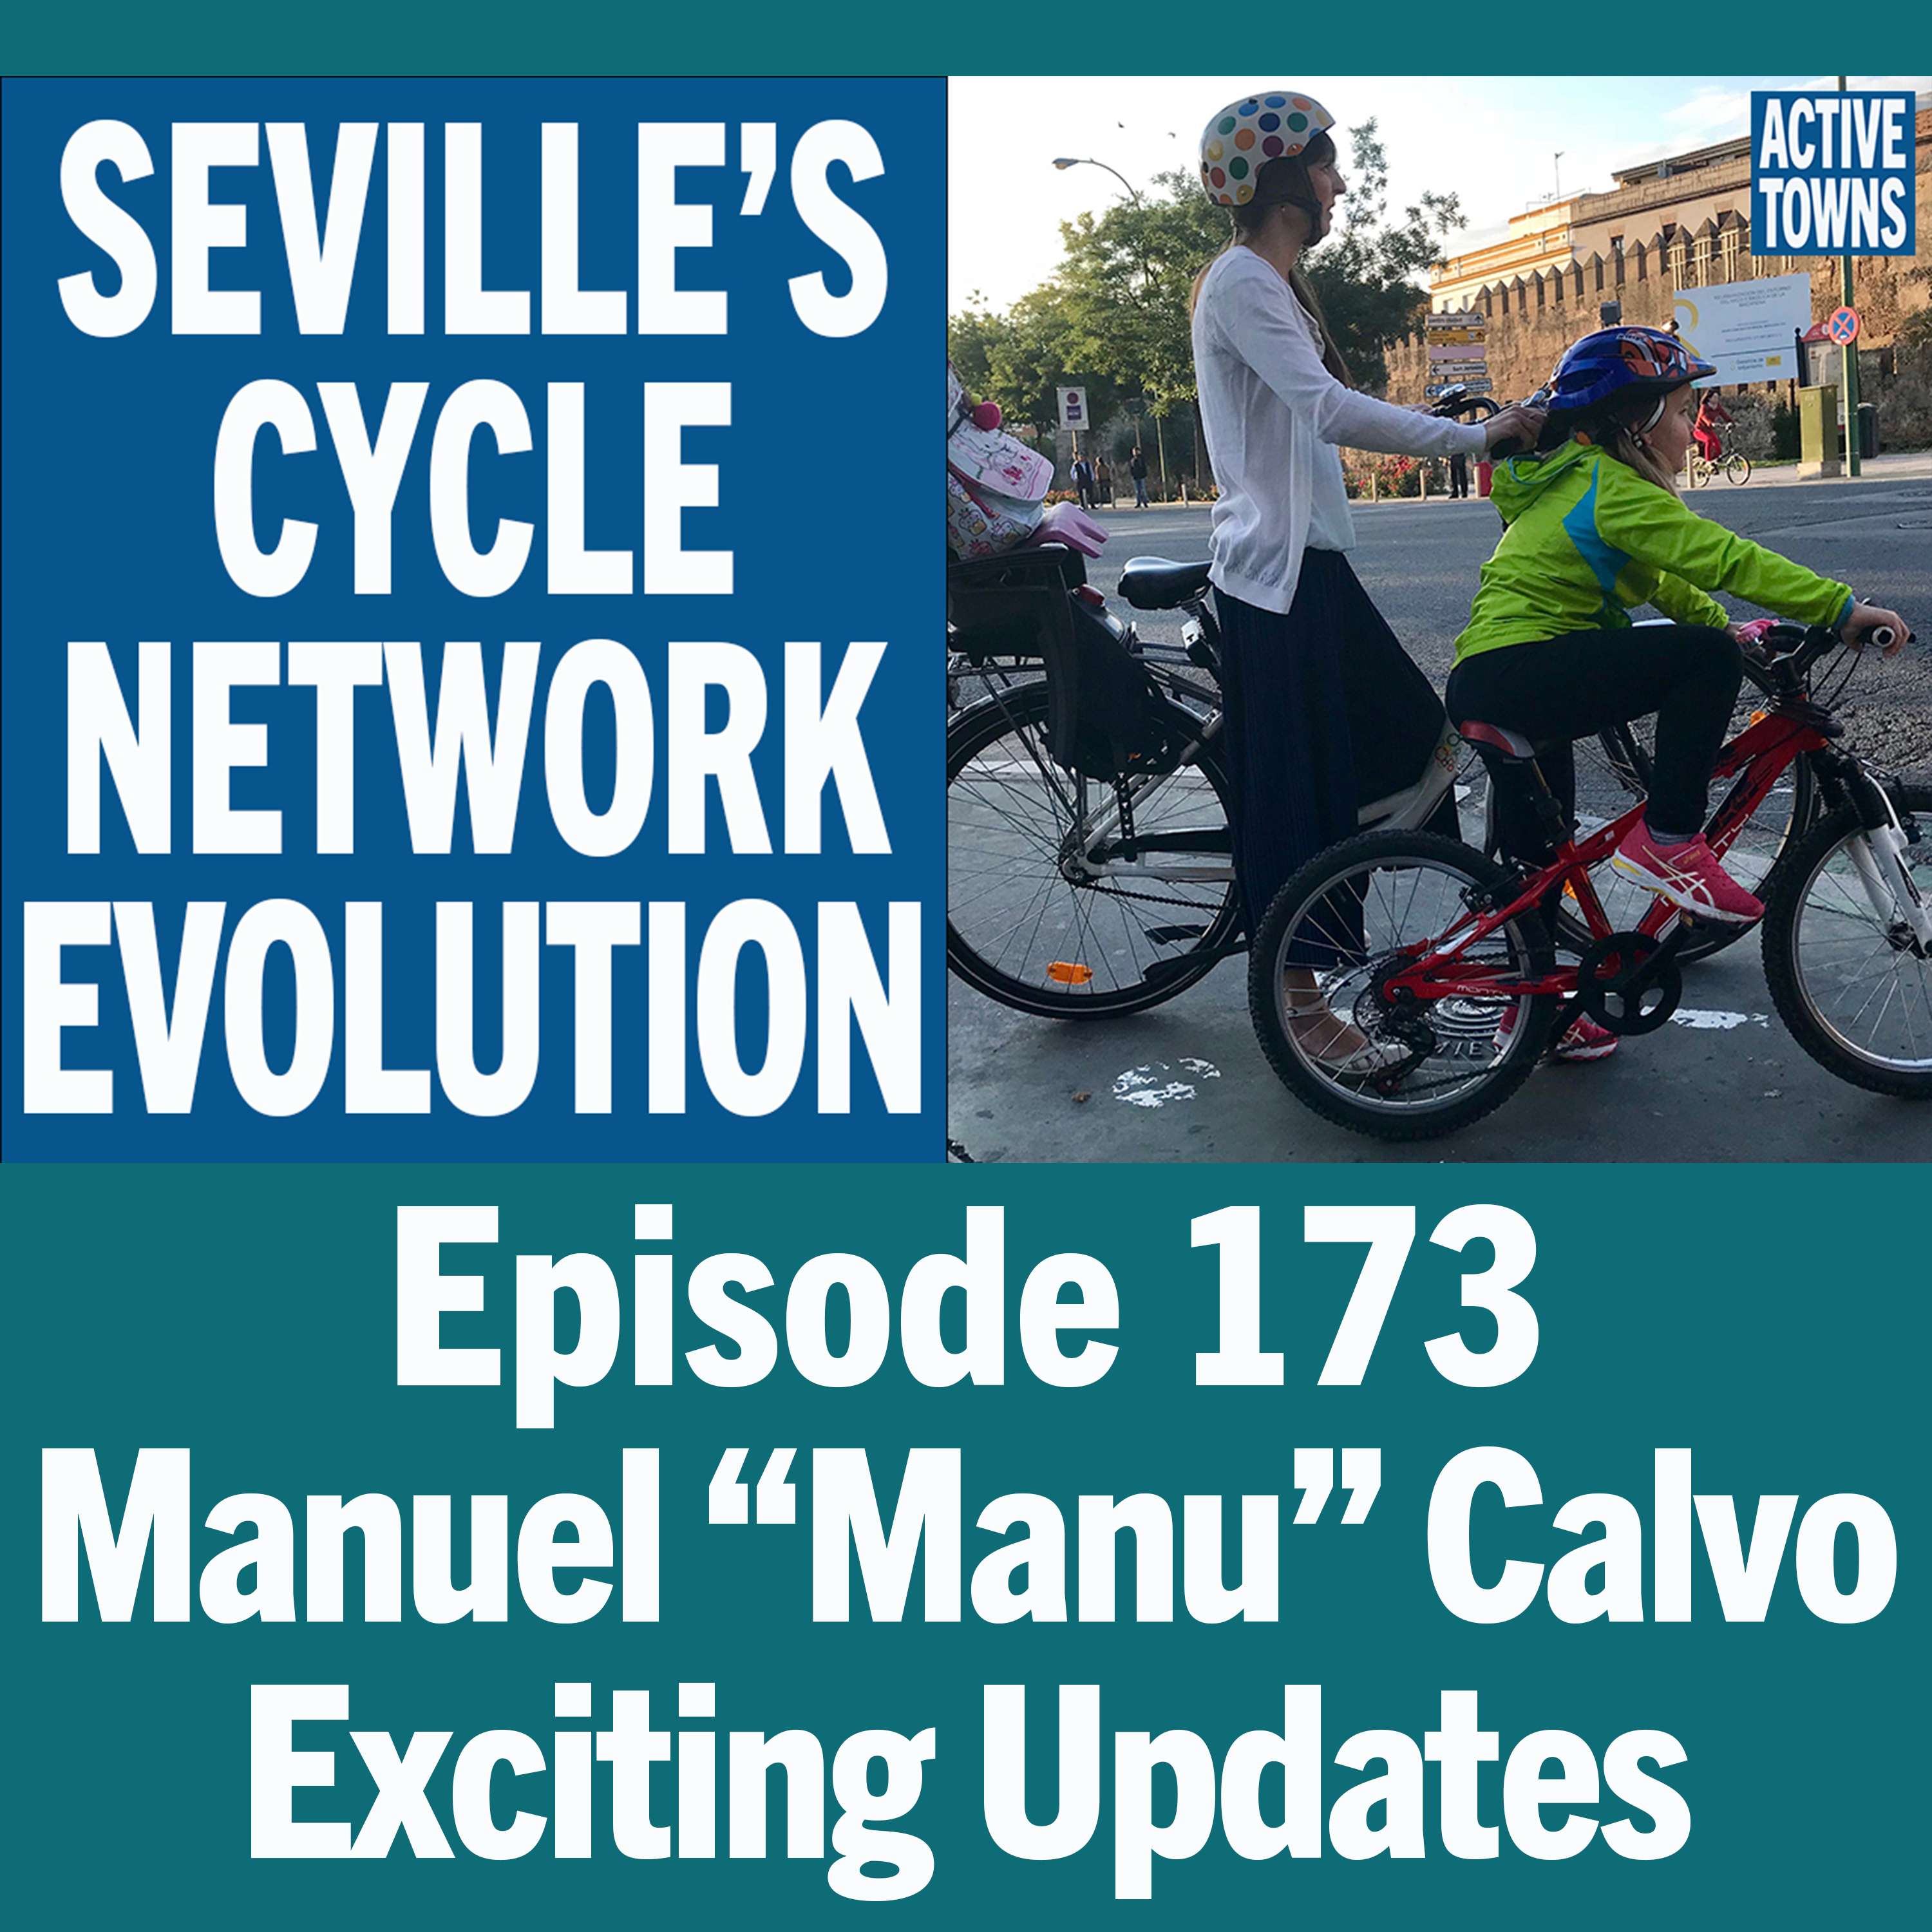 Cycle Network Evolution w/ Manu Calvo (video available)